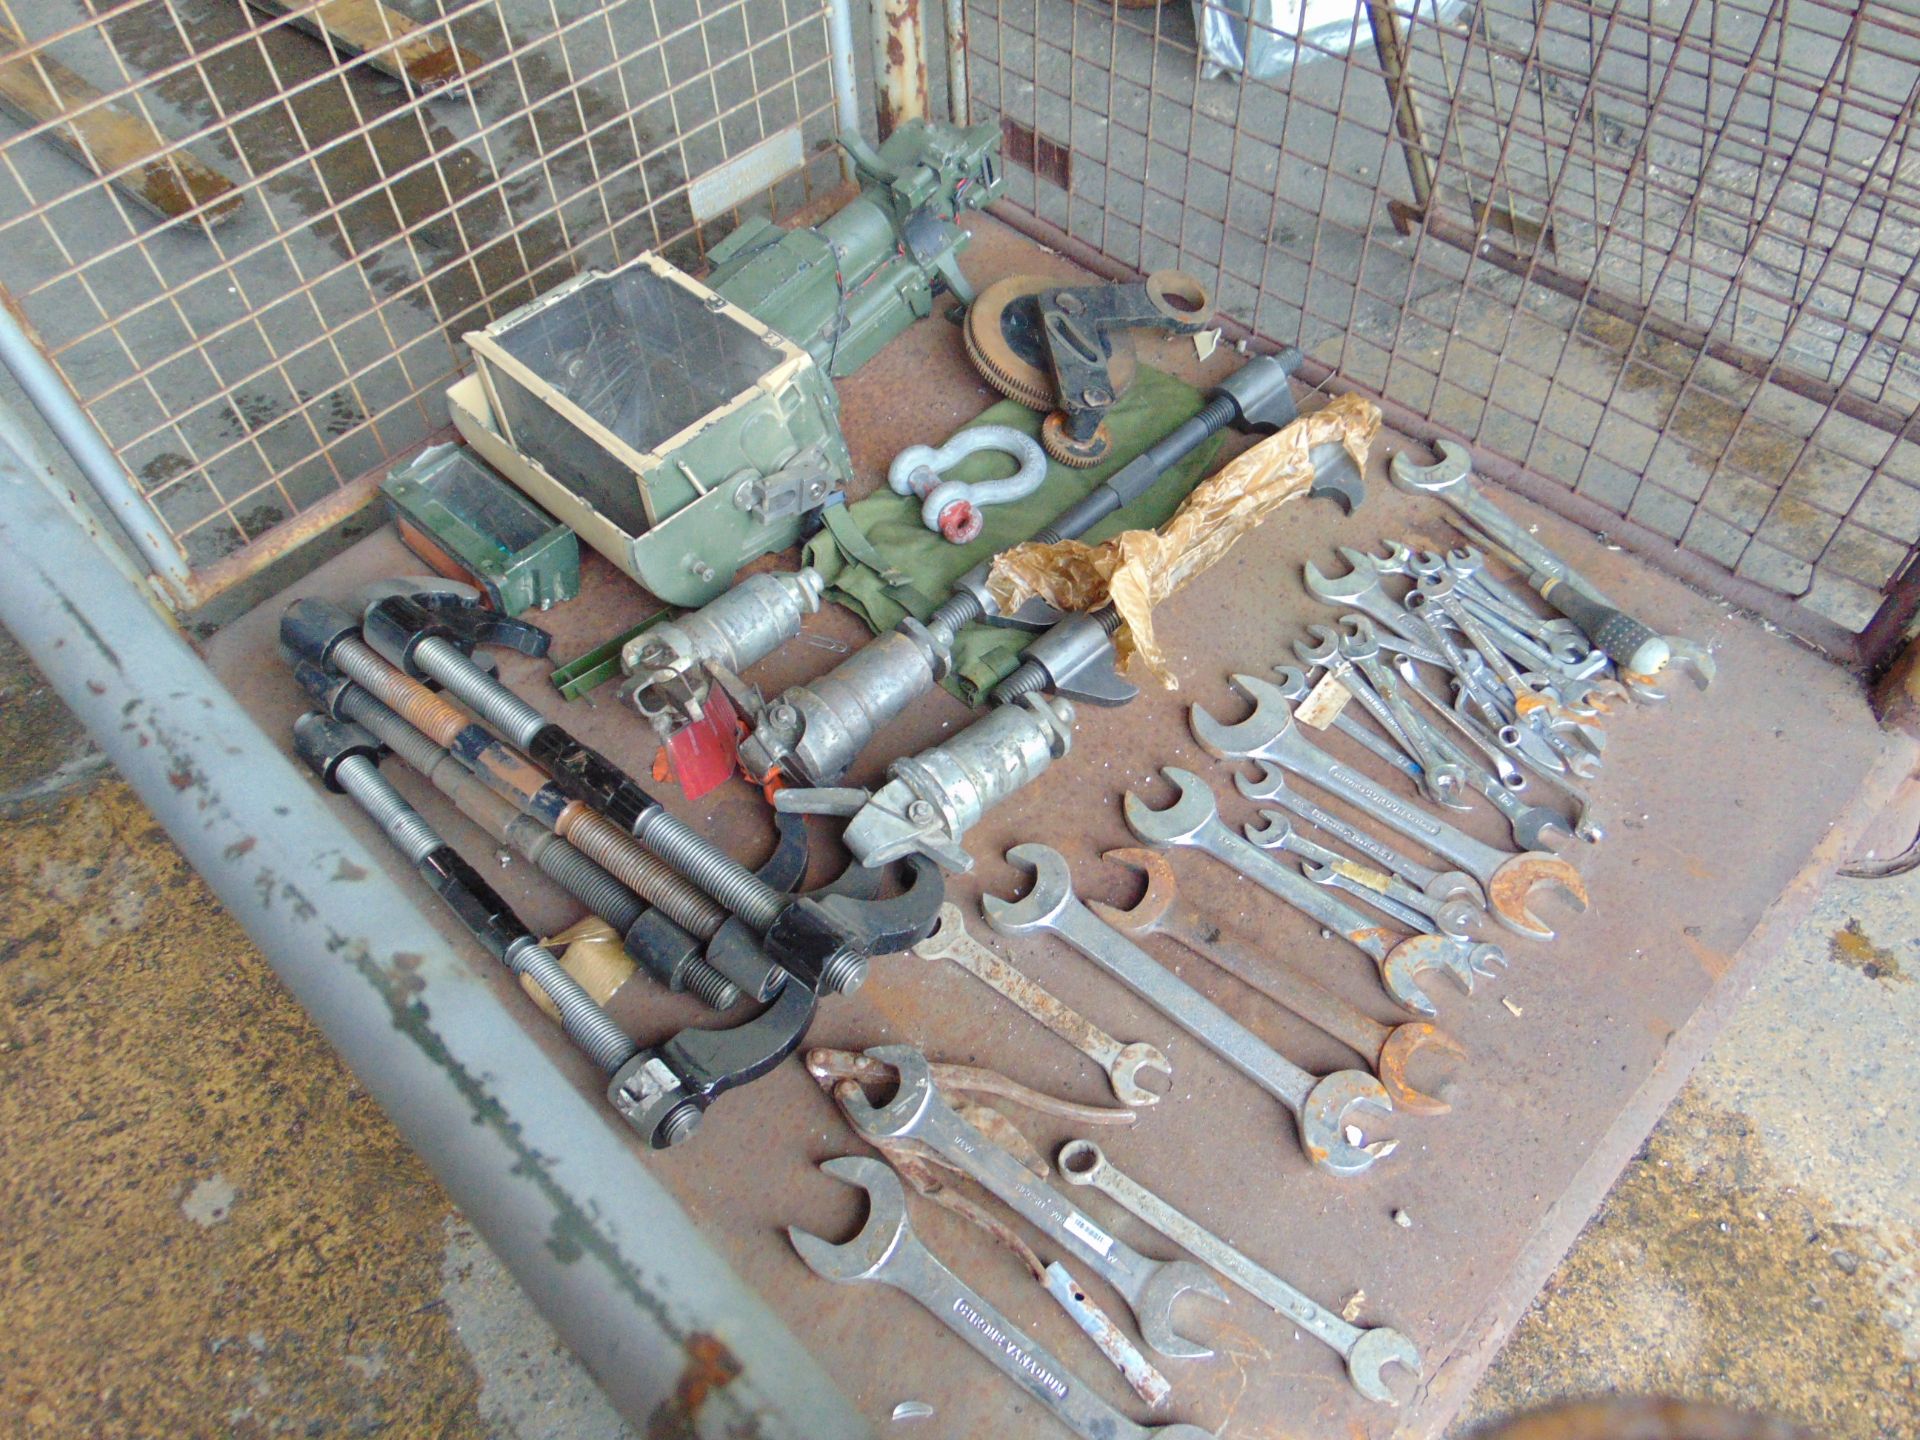 Track Clamps Periscope, Tools, Recovery Pins etc - Image 3 of 8